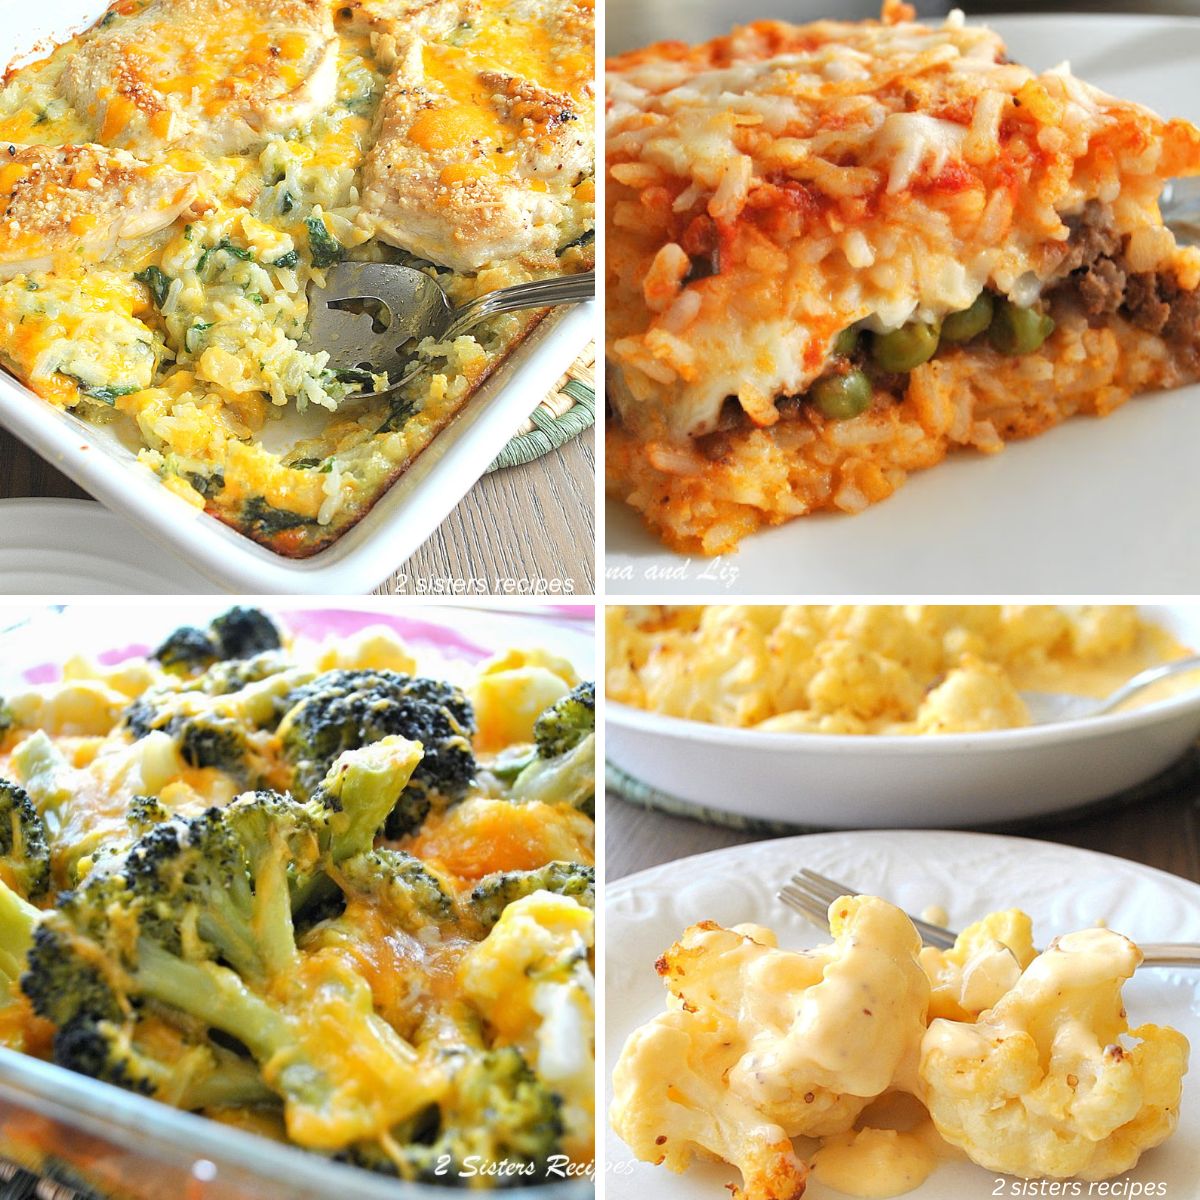 15 Freezable Dinner Casseroles by 2sistersrecipes.com